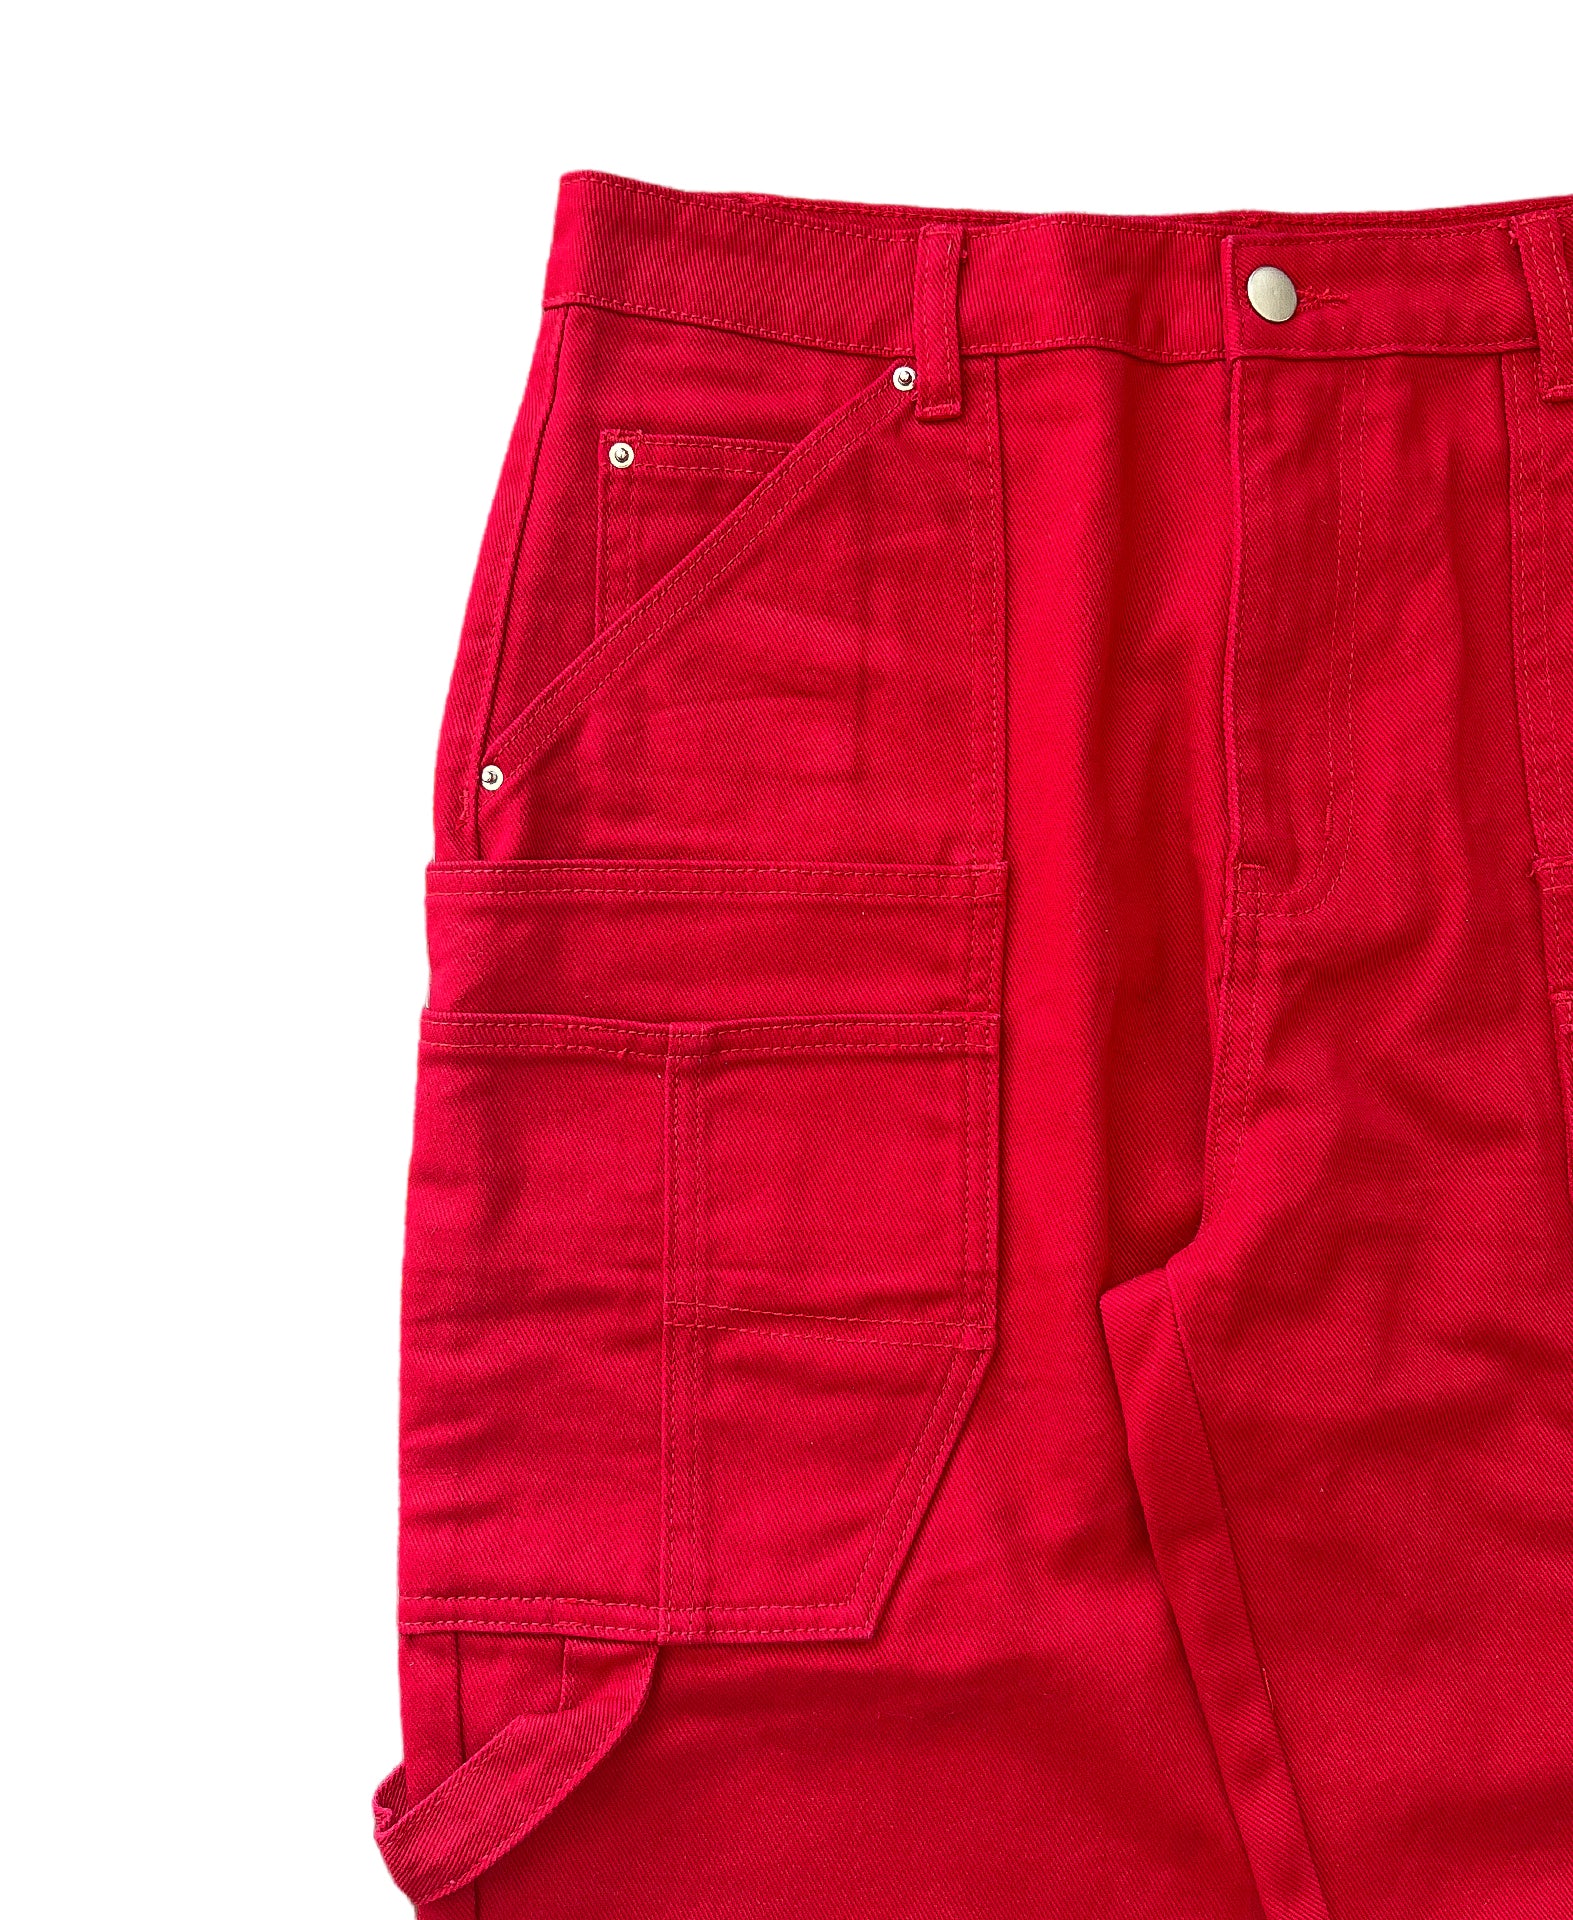 Utility Work Pants - Red